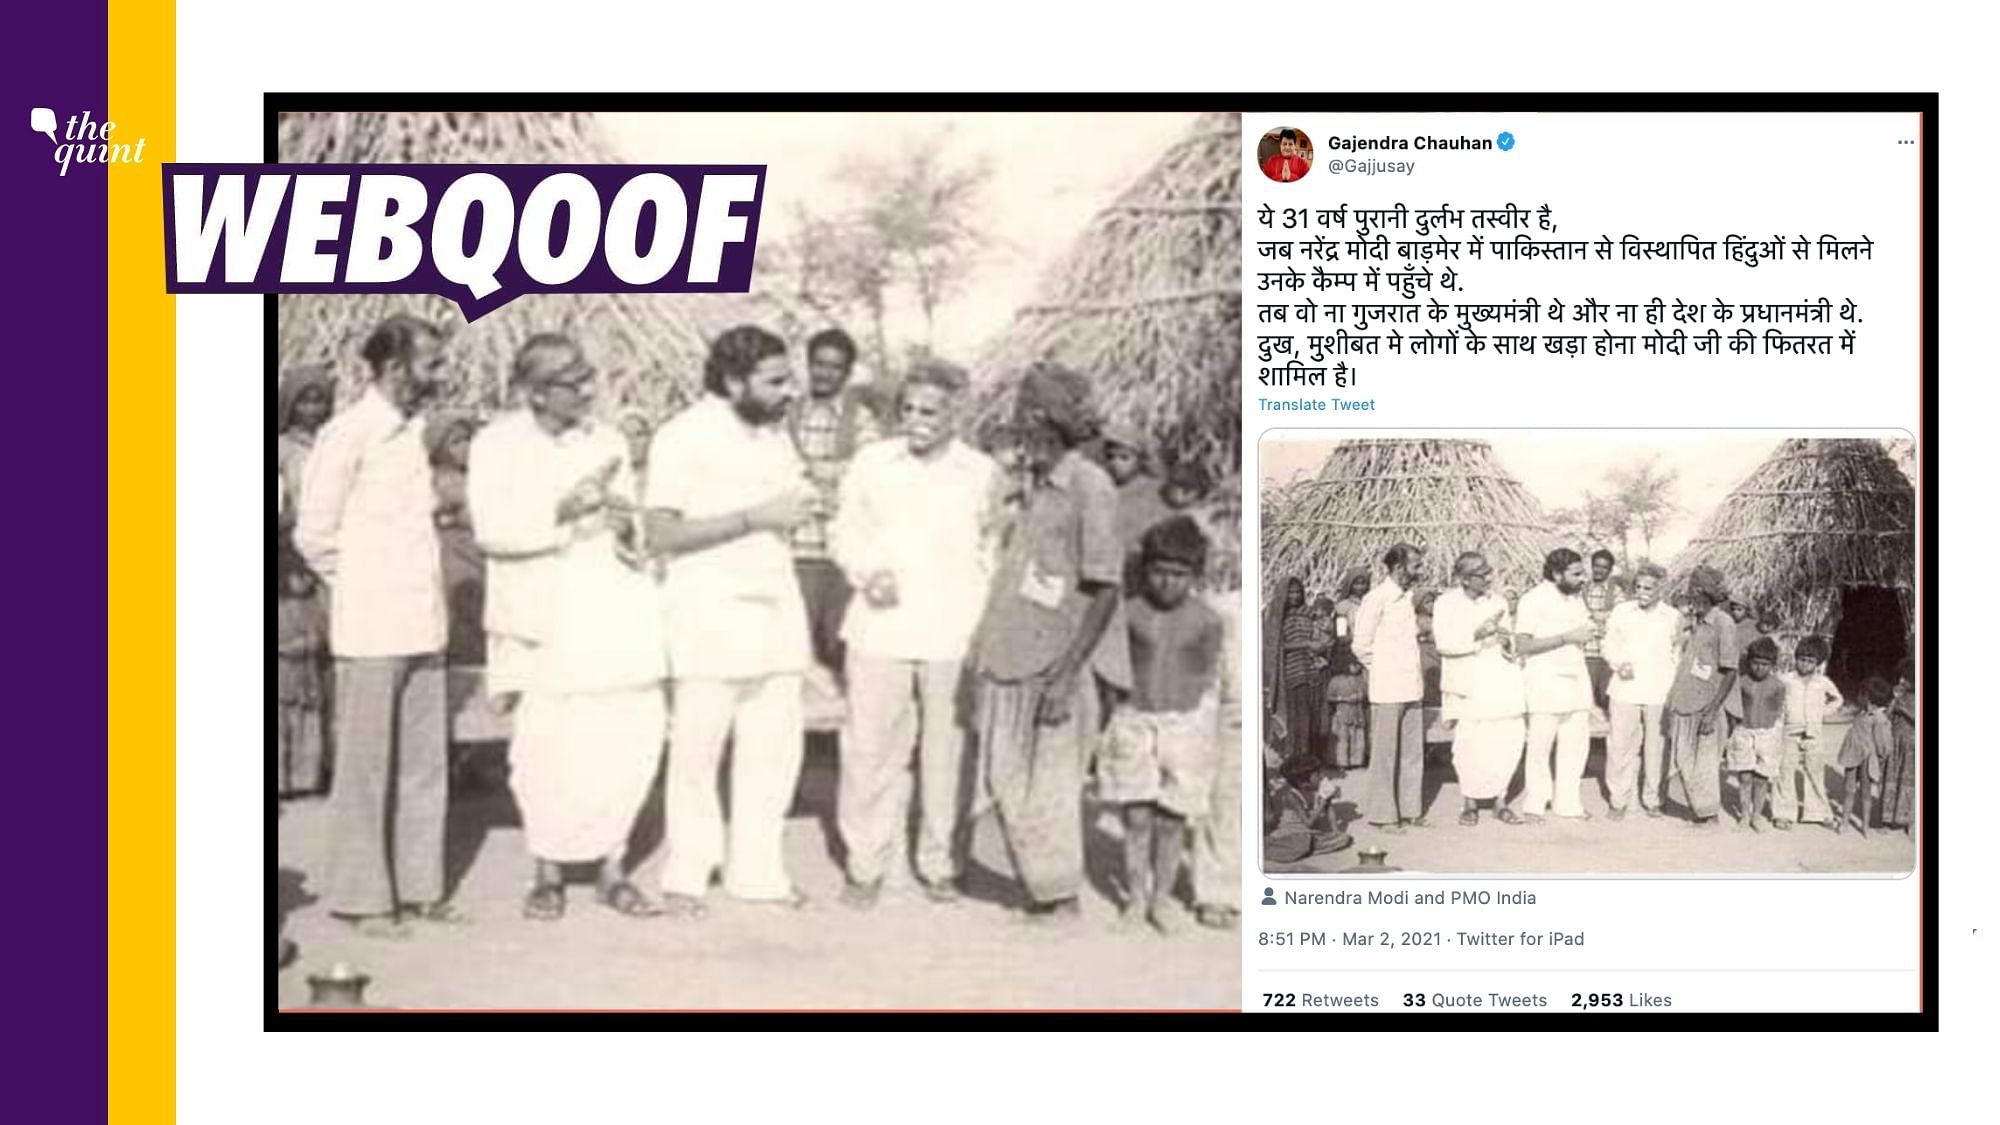 The viral image shows Prime Minister Narendra Modi in a village in Gujarat and not Barmer as claimed.